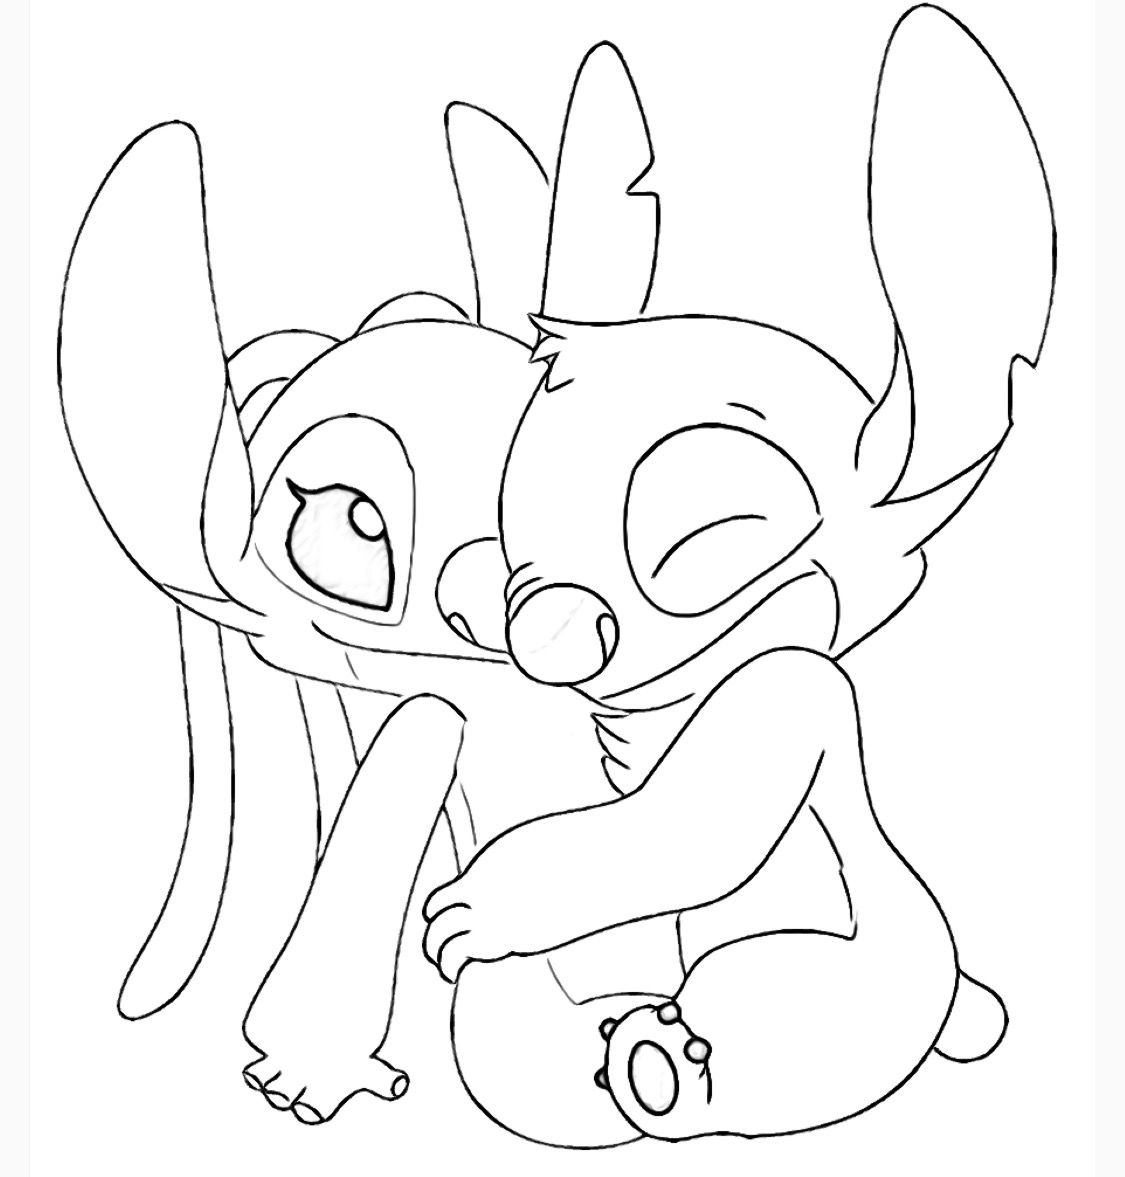 Angel And Stitch Coloring Pages Pdf to Print - Printable Angel And Stitch Coloring Pages